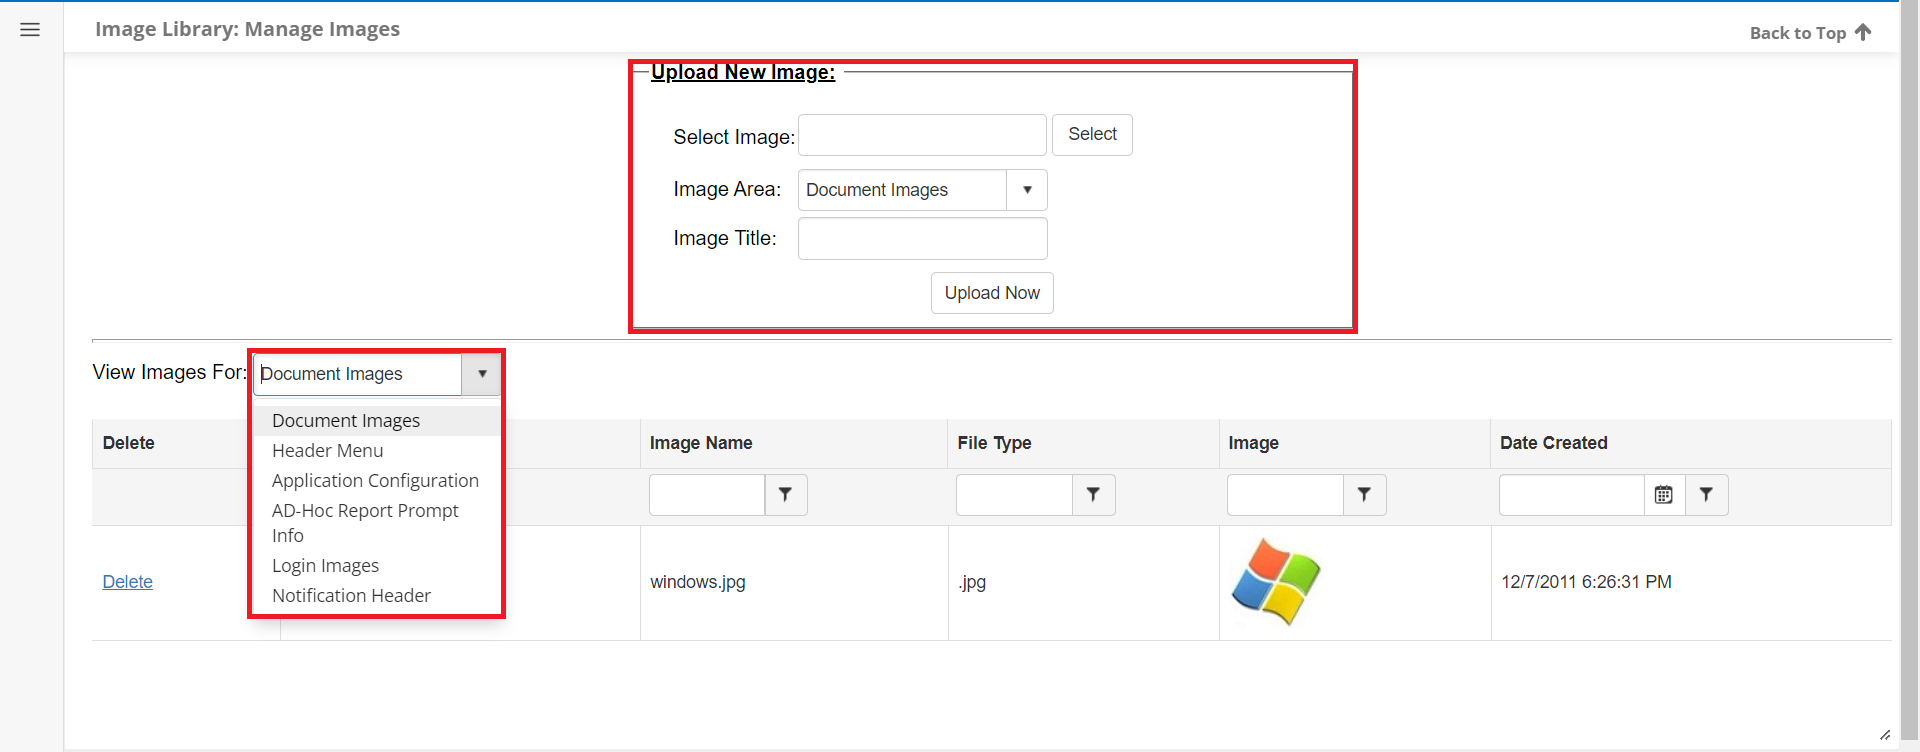 The Upload New Image box on the Image Library: Manage Images page is highlighted.